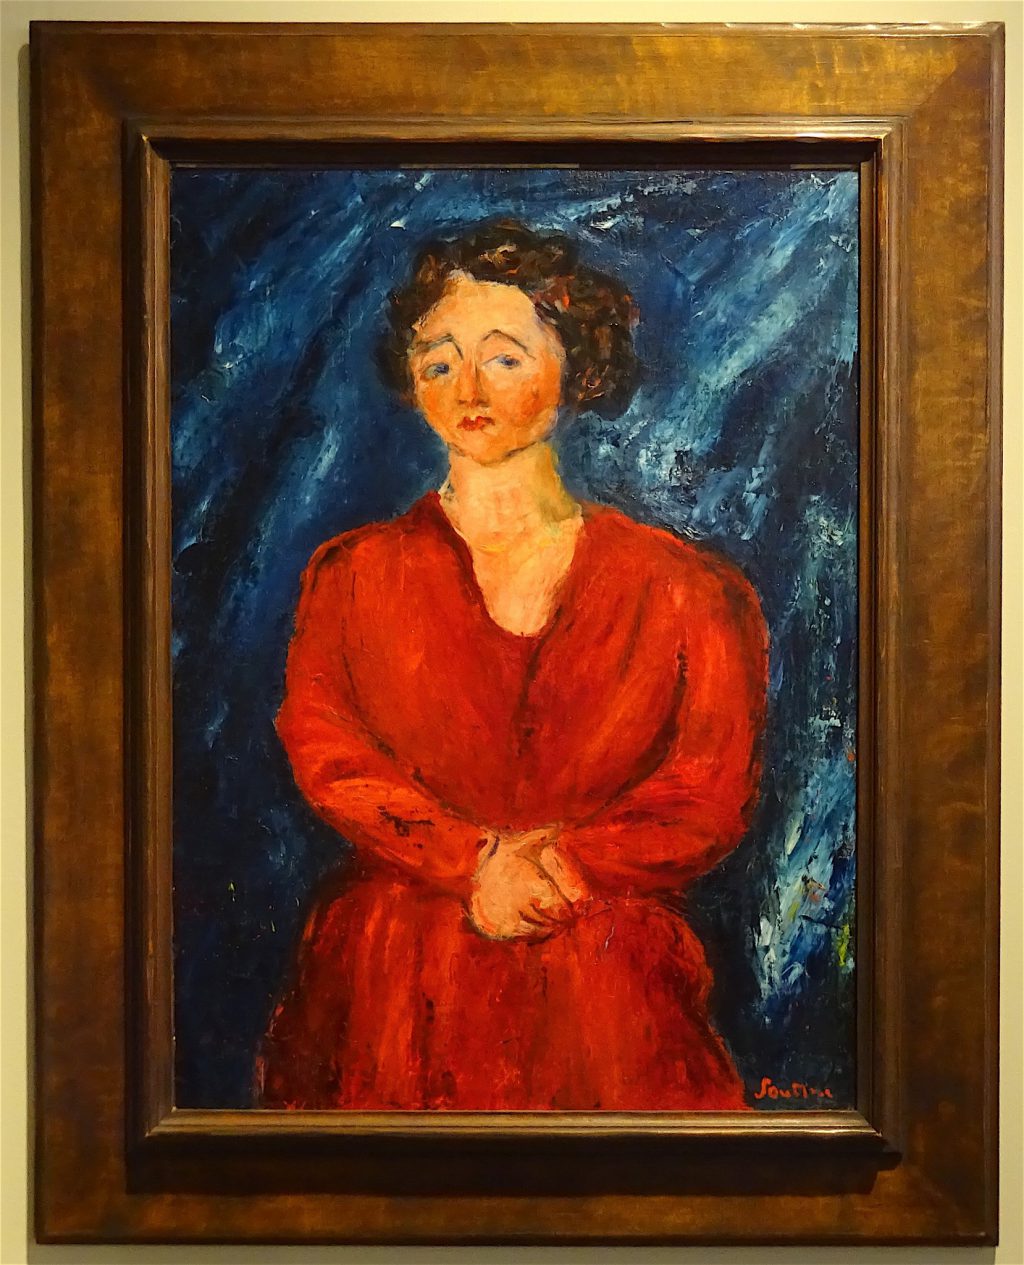 Chaim Soutine “Woman in Red on Blue Ground” 1928, Oil on canvas